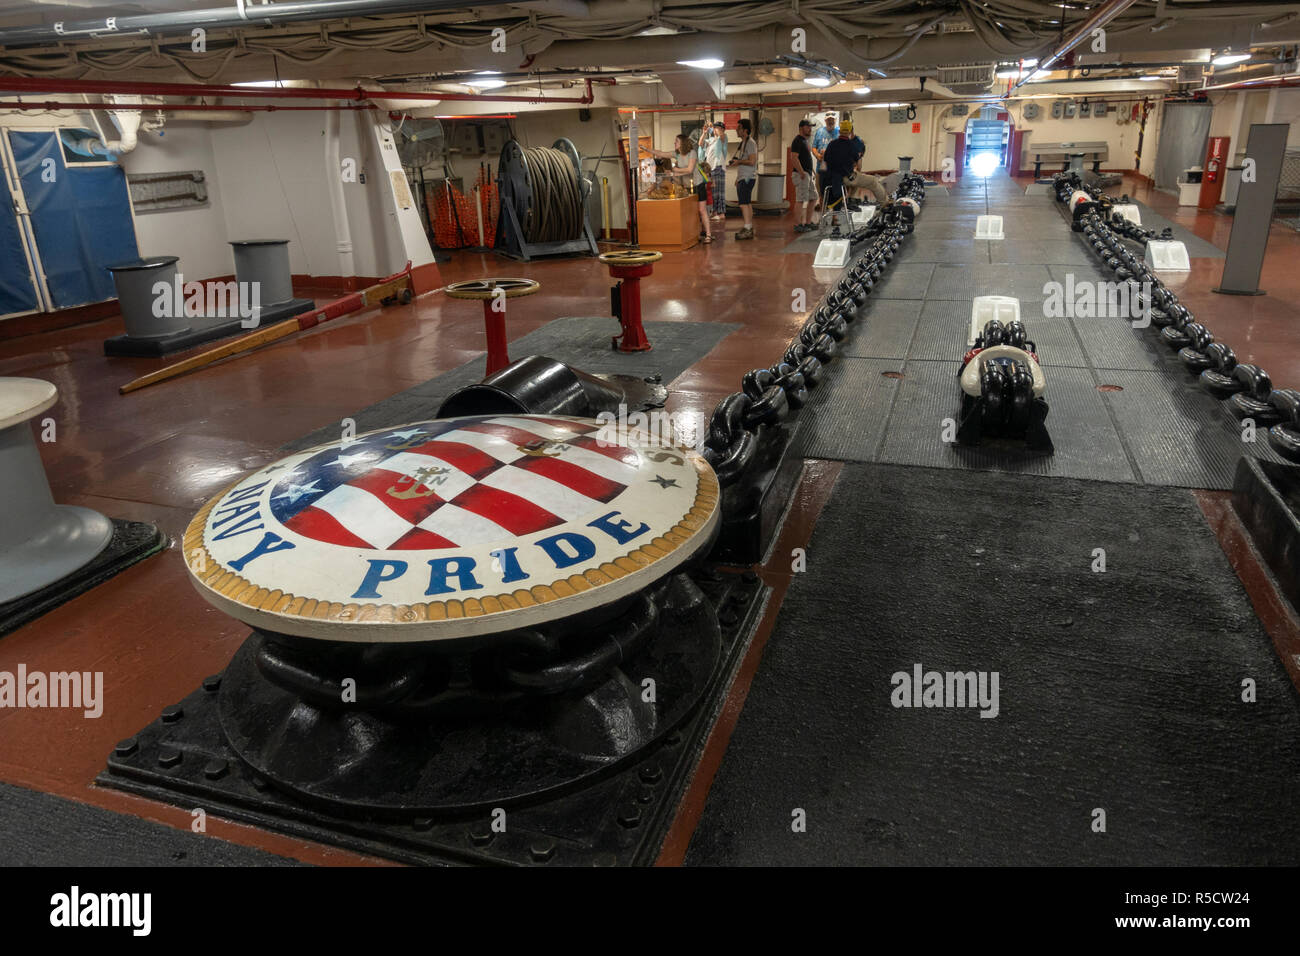 Fo'c's le oder focsle (Anchor chain Zimmer), USS Midway Museum, San Diego, California, United States. Stockfoto